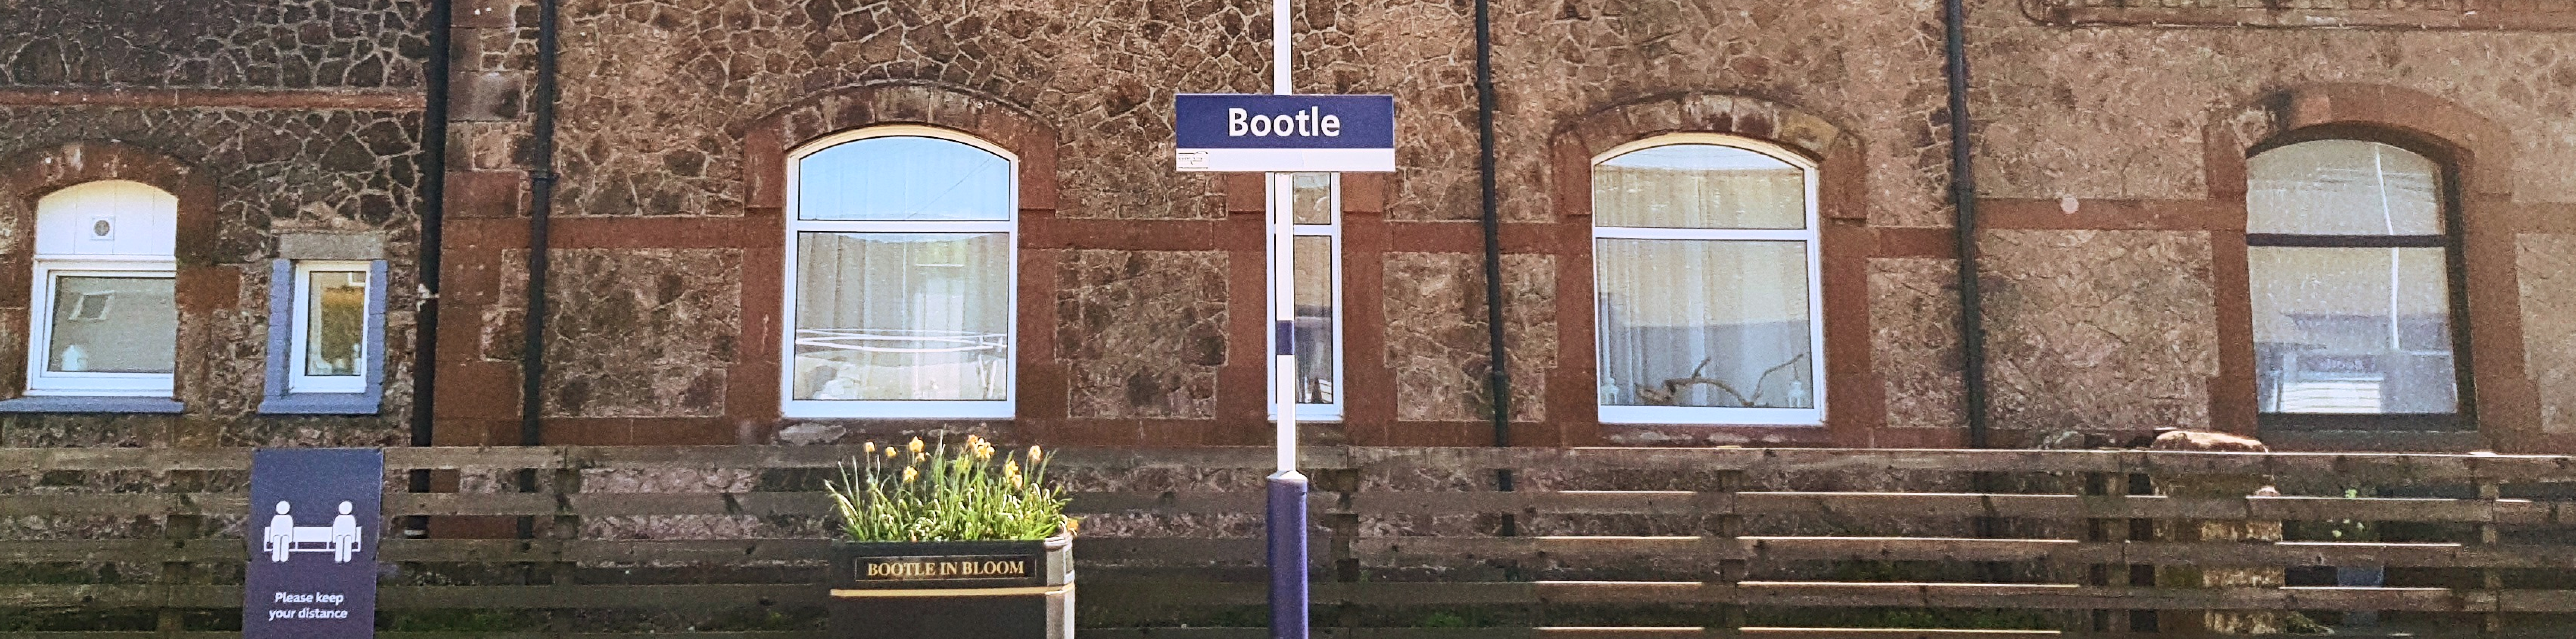 Transport and Commuting - Bootle Train Station